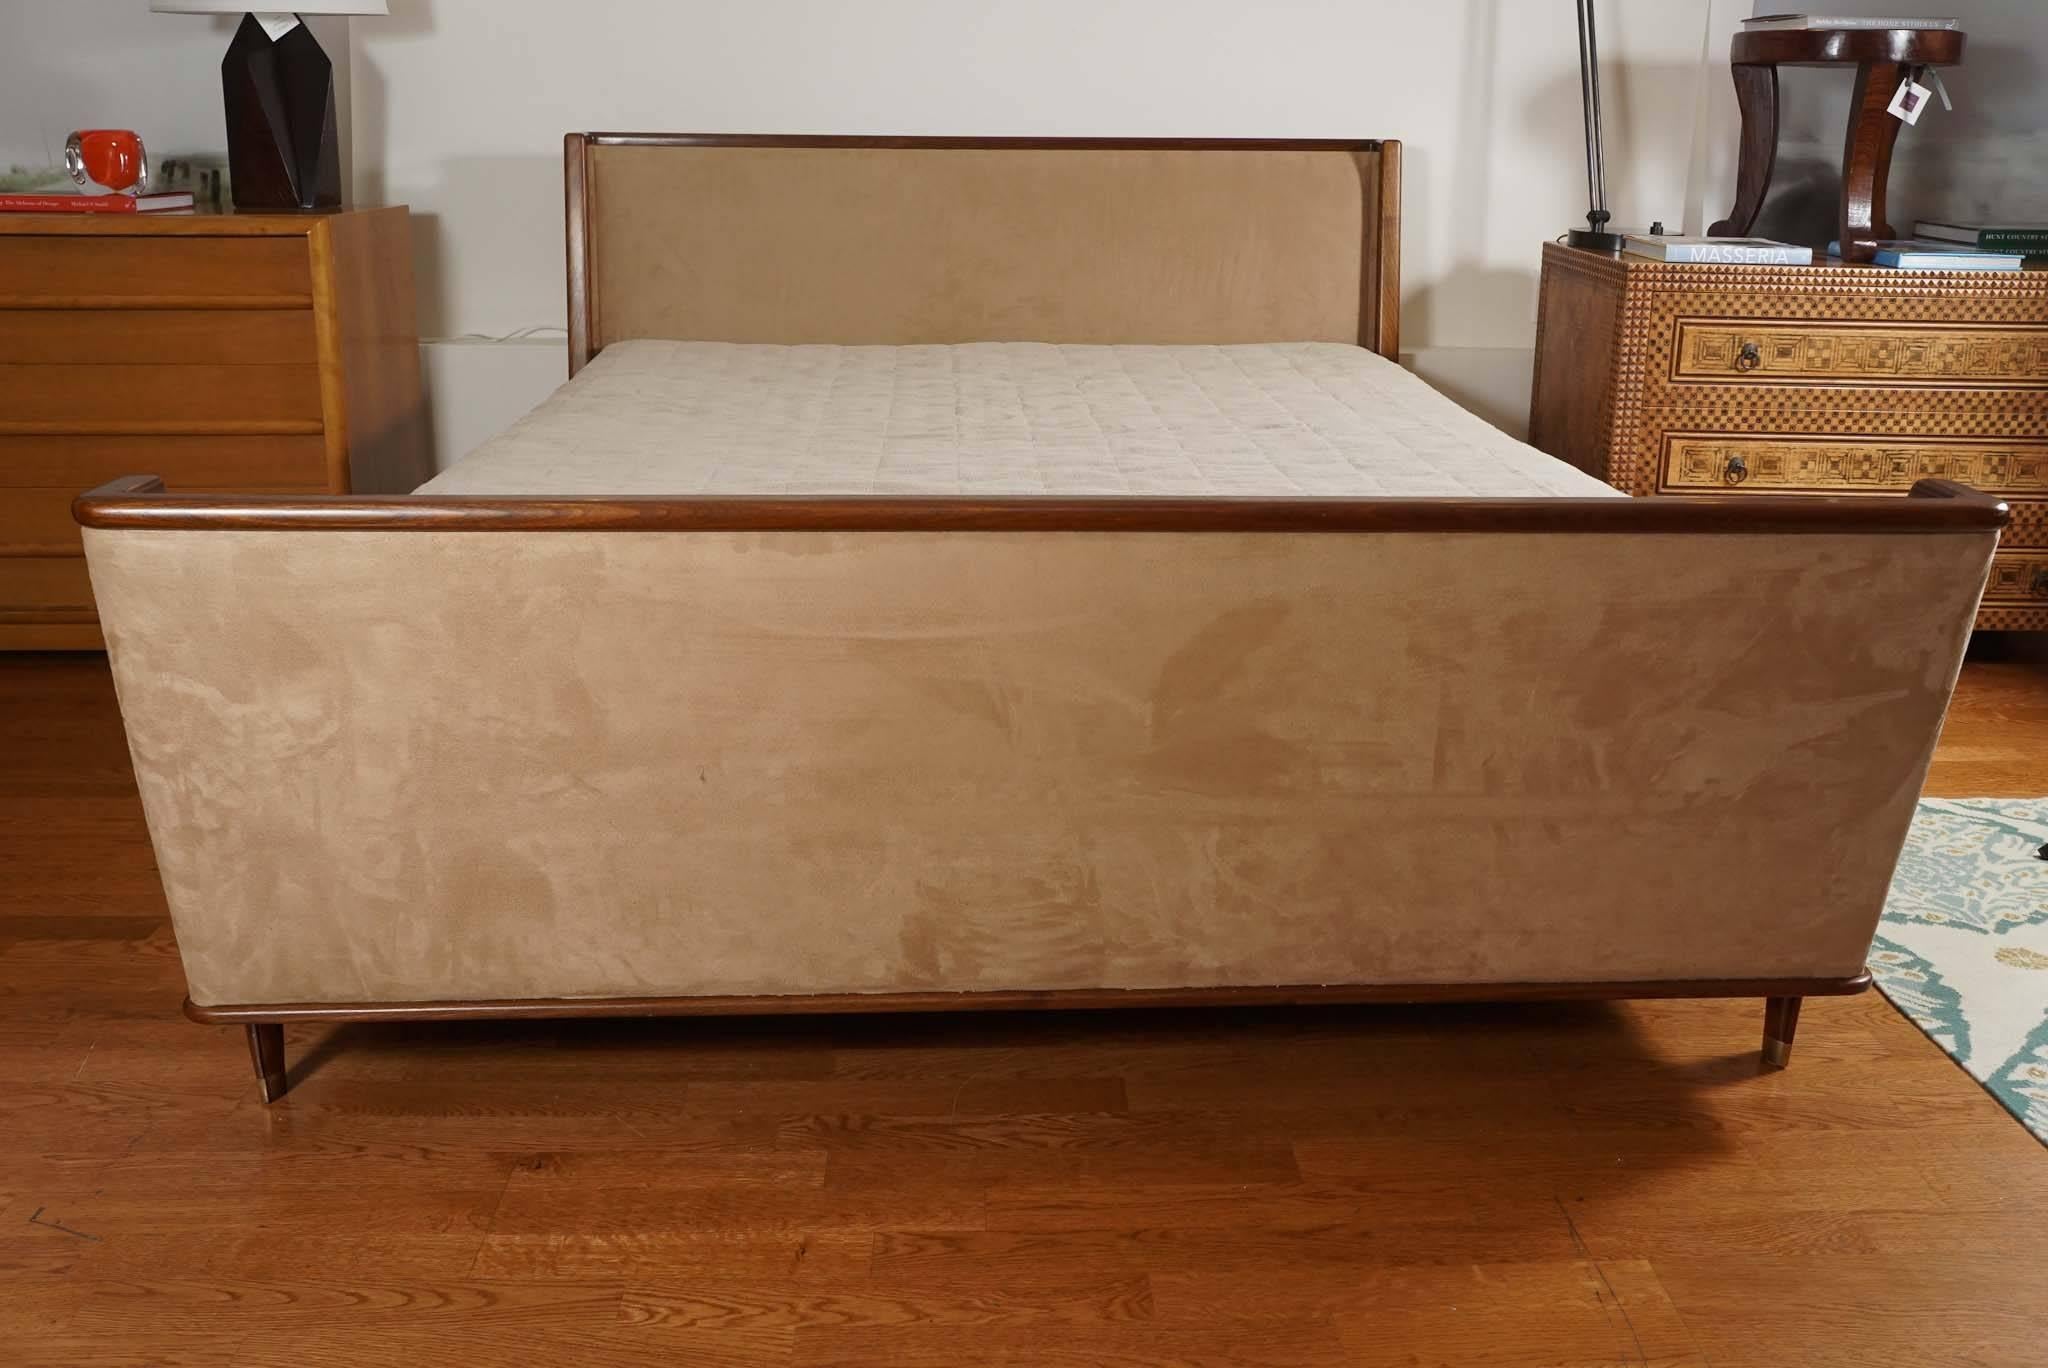 Wood and upholstered bed, inspired by a 1940s market find in France.
Curved headboard and footboard with side rails. Queen size shown.

Custom finishes available: Light oak, cafe walnut, ebonized walnut, medium mahogany.

COM: Ten yards based